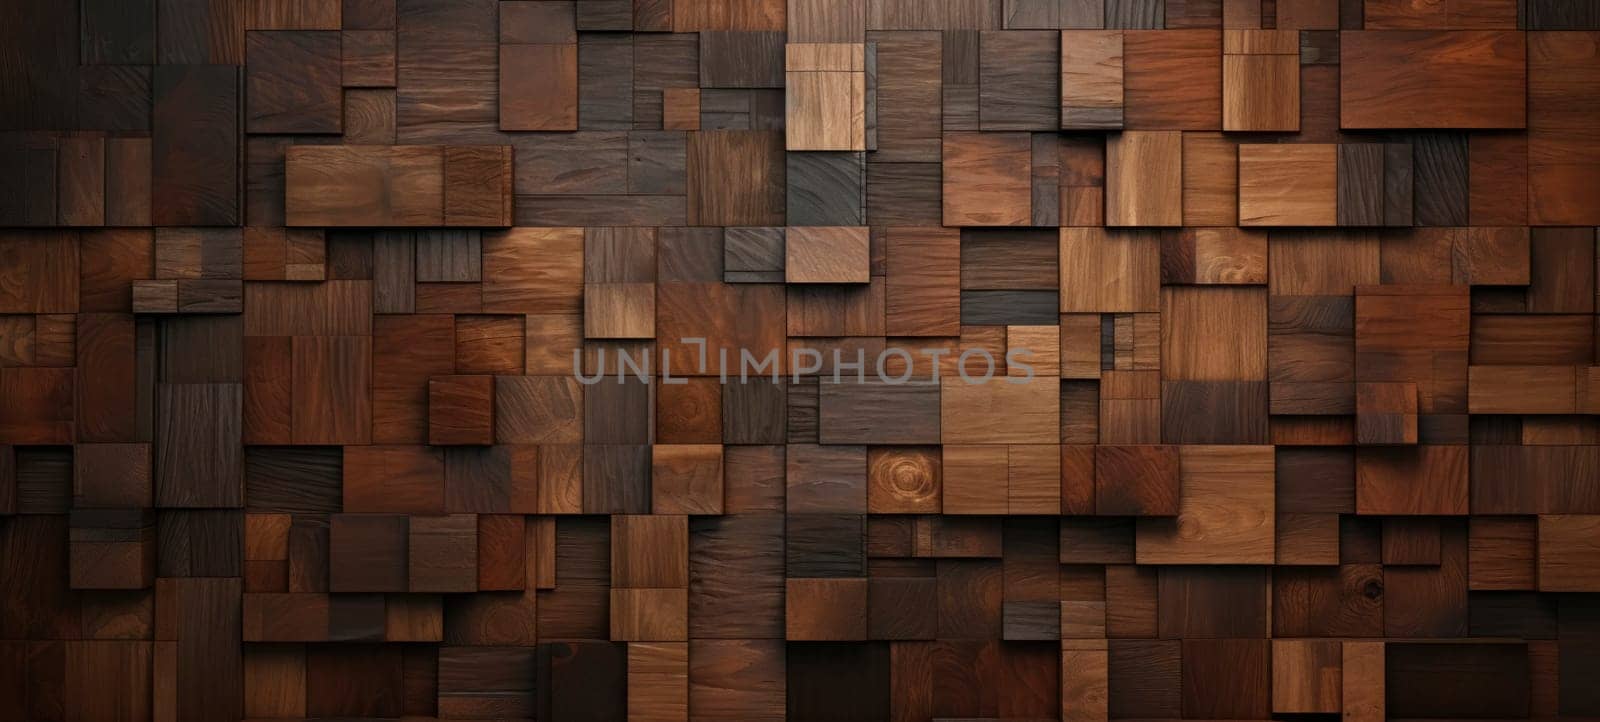 Close-up of an assortment of wooden blocks creating a textured wall, suitable for backgrounds or patterns.